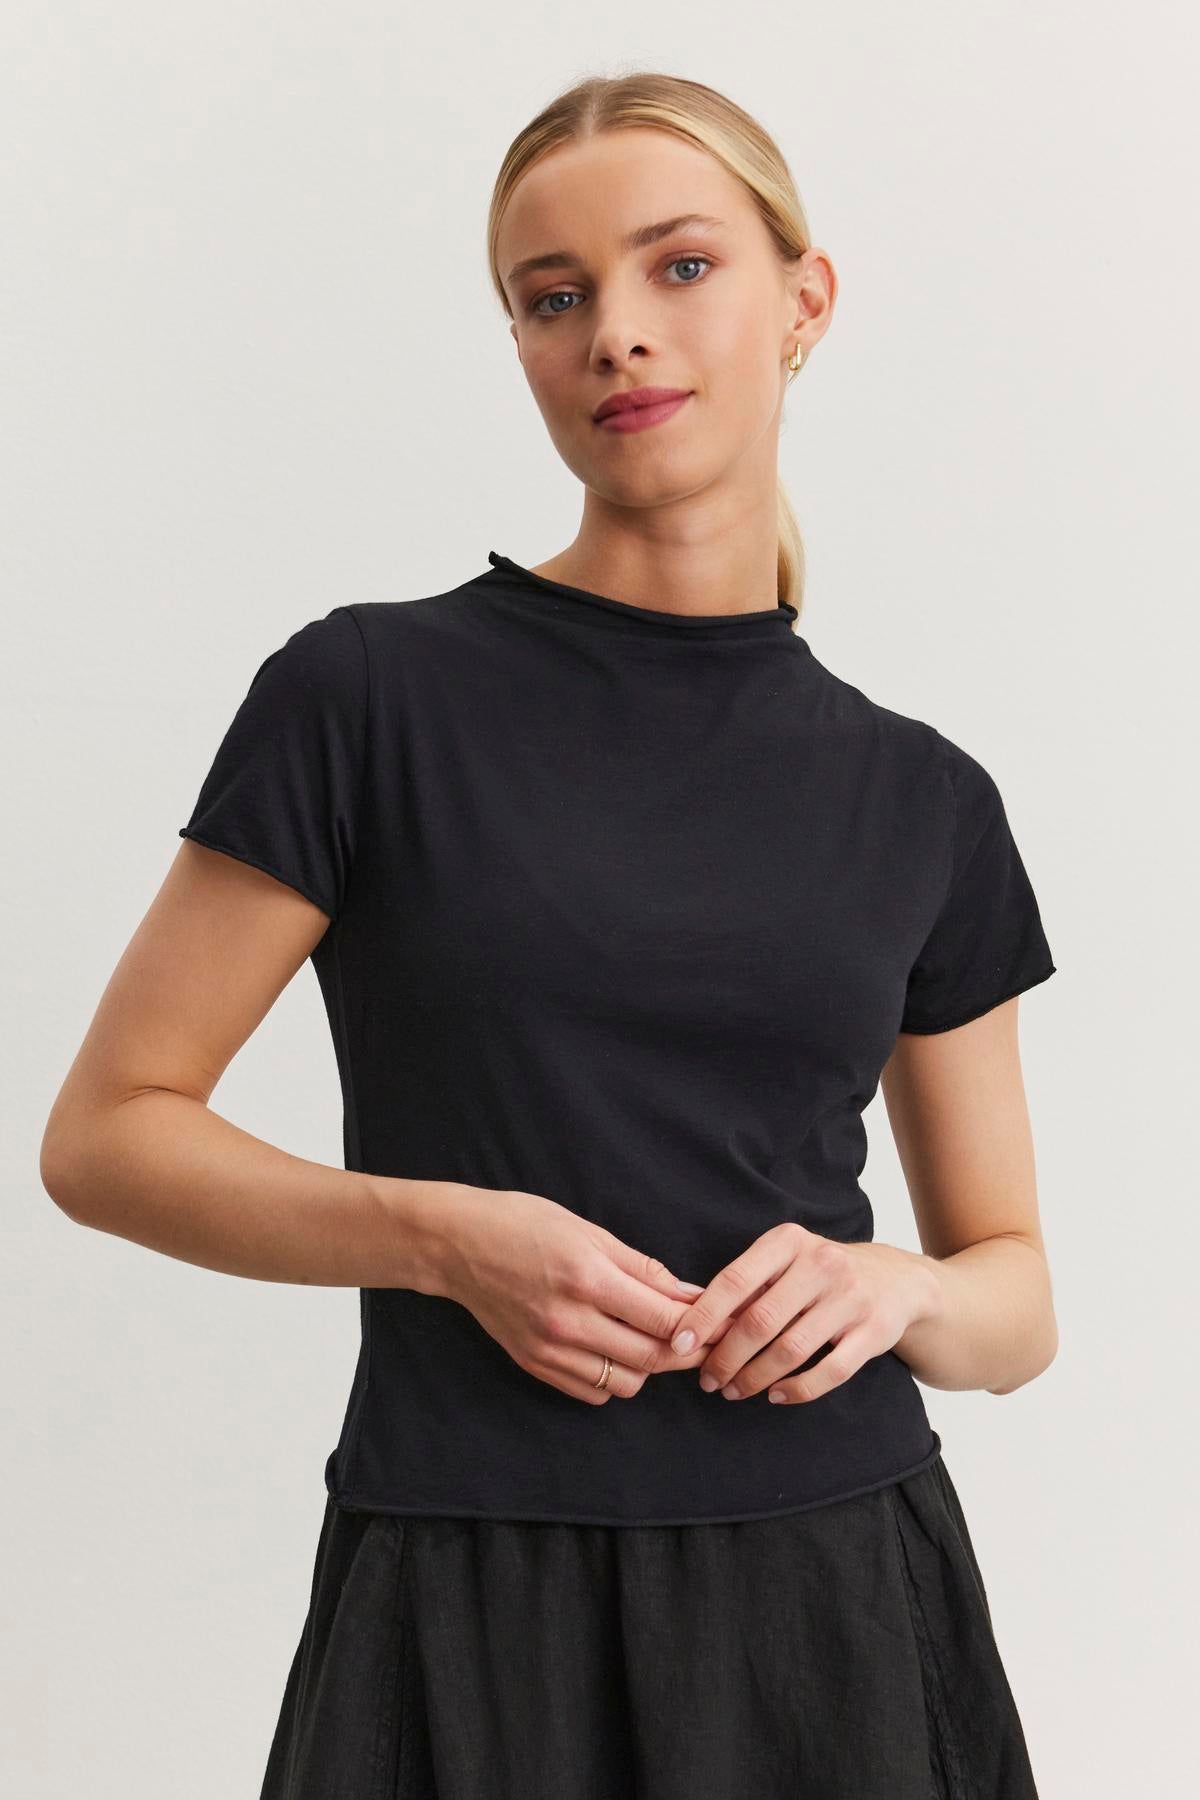 A person with blonde hair stands against a plain background, wearing the Velvet by Graham & Spencer JACKIE MOCK NECK TEE in gauzy whisper fabrication and a black skirt, with hands loosely clasped.-37104257761473